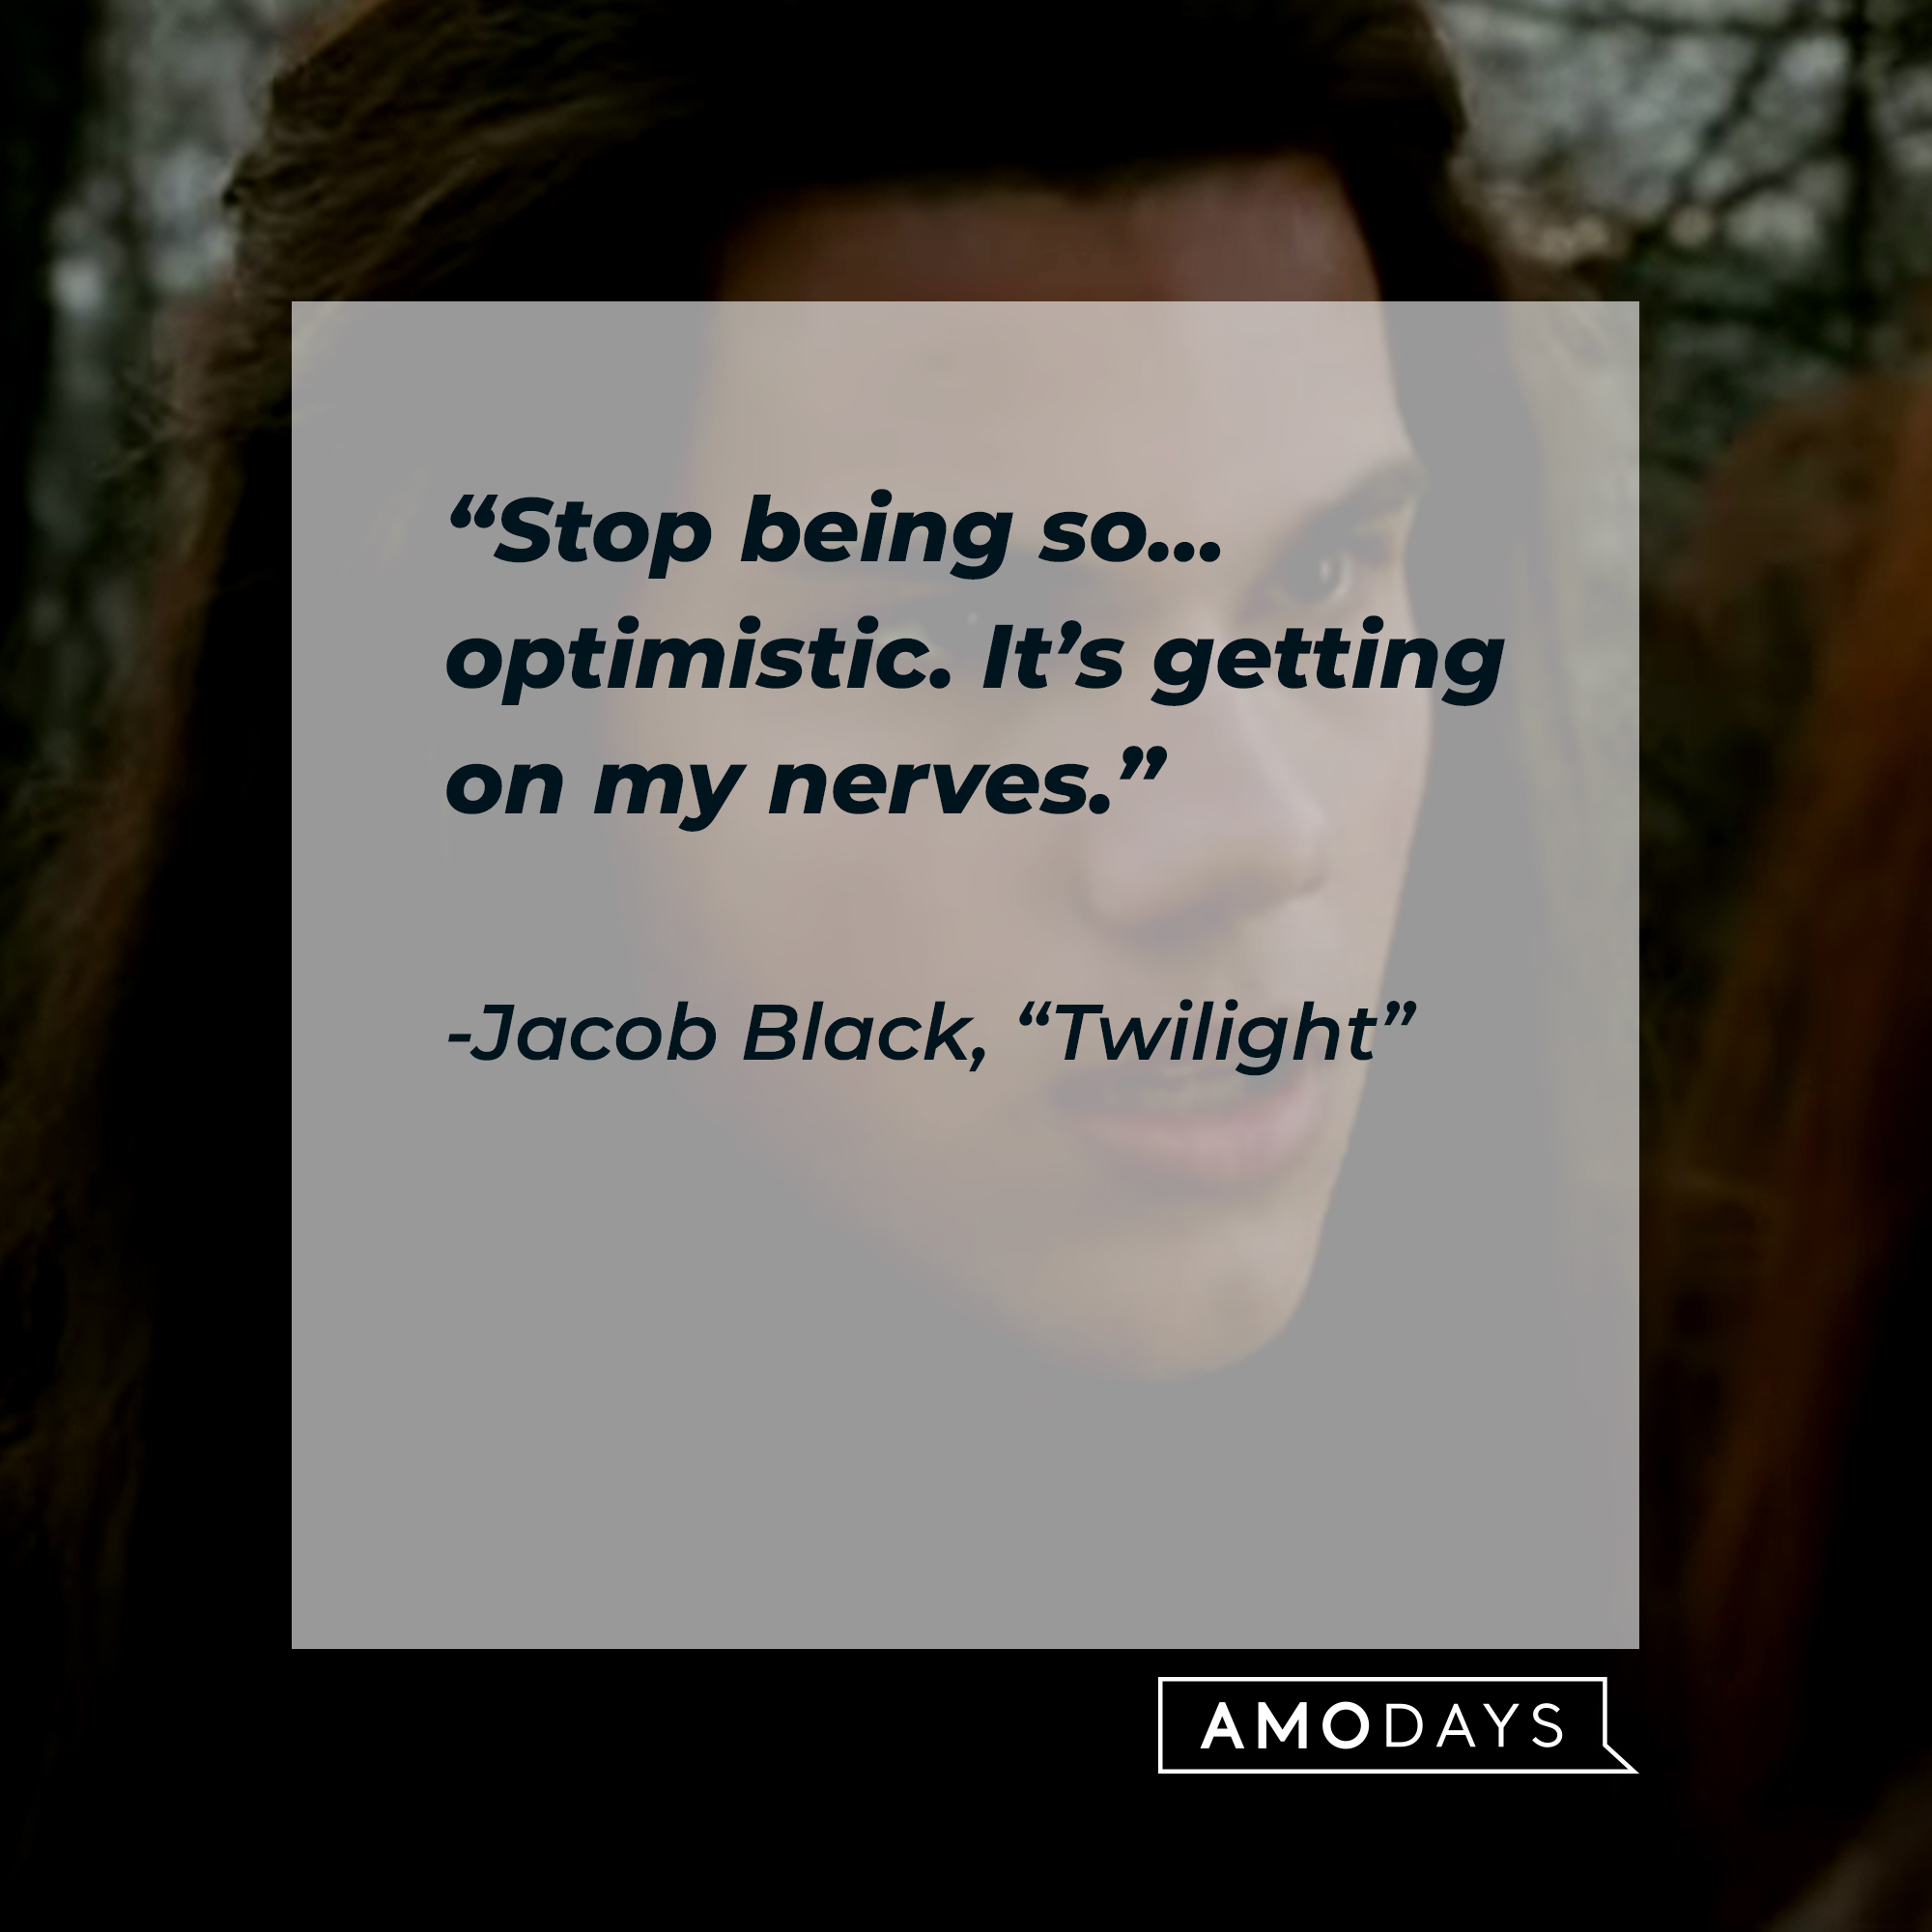 Image of Jacob Black with his quote in "Twilight:" “Stop being so… optimistic. It’s getting on my nerves.” | Source: Facebook.com/twilight